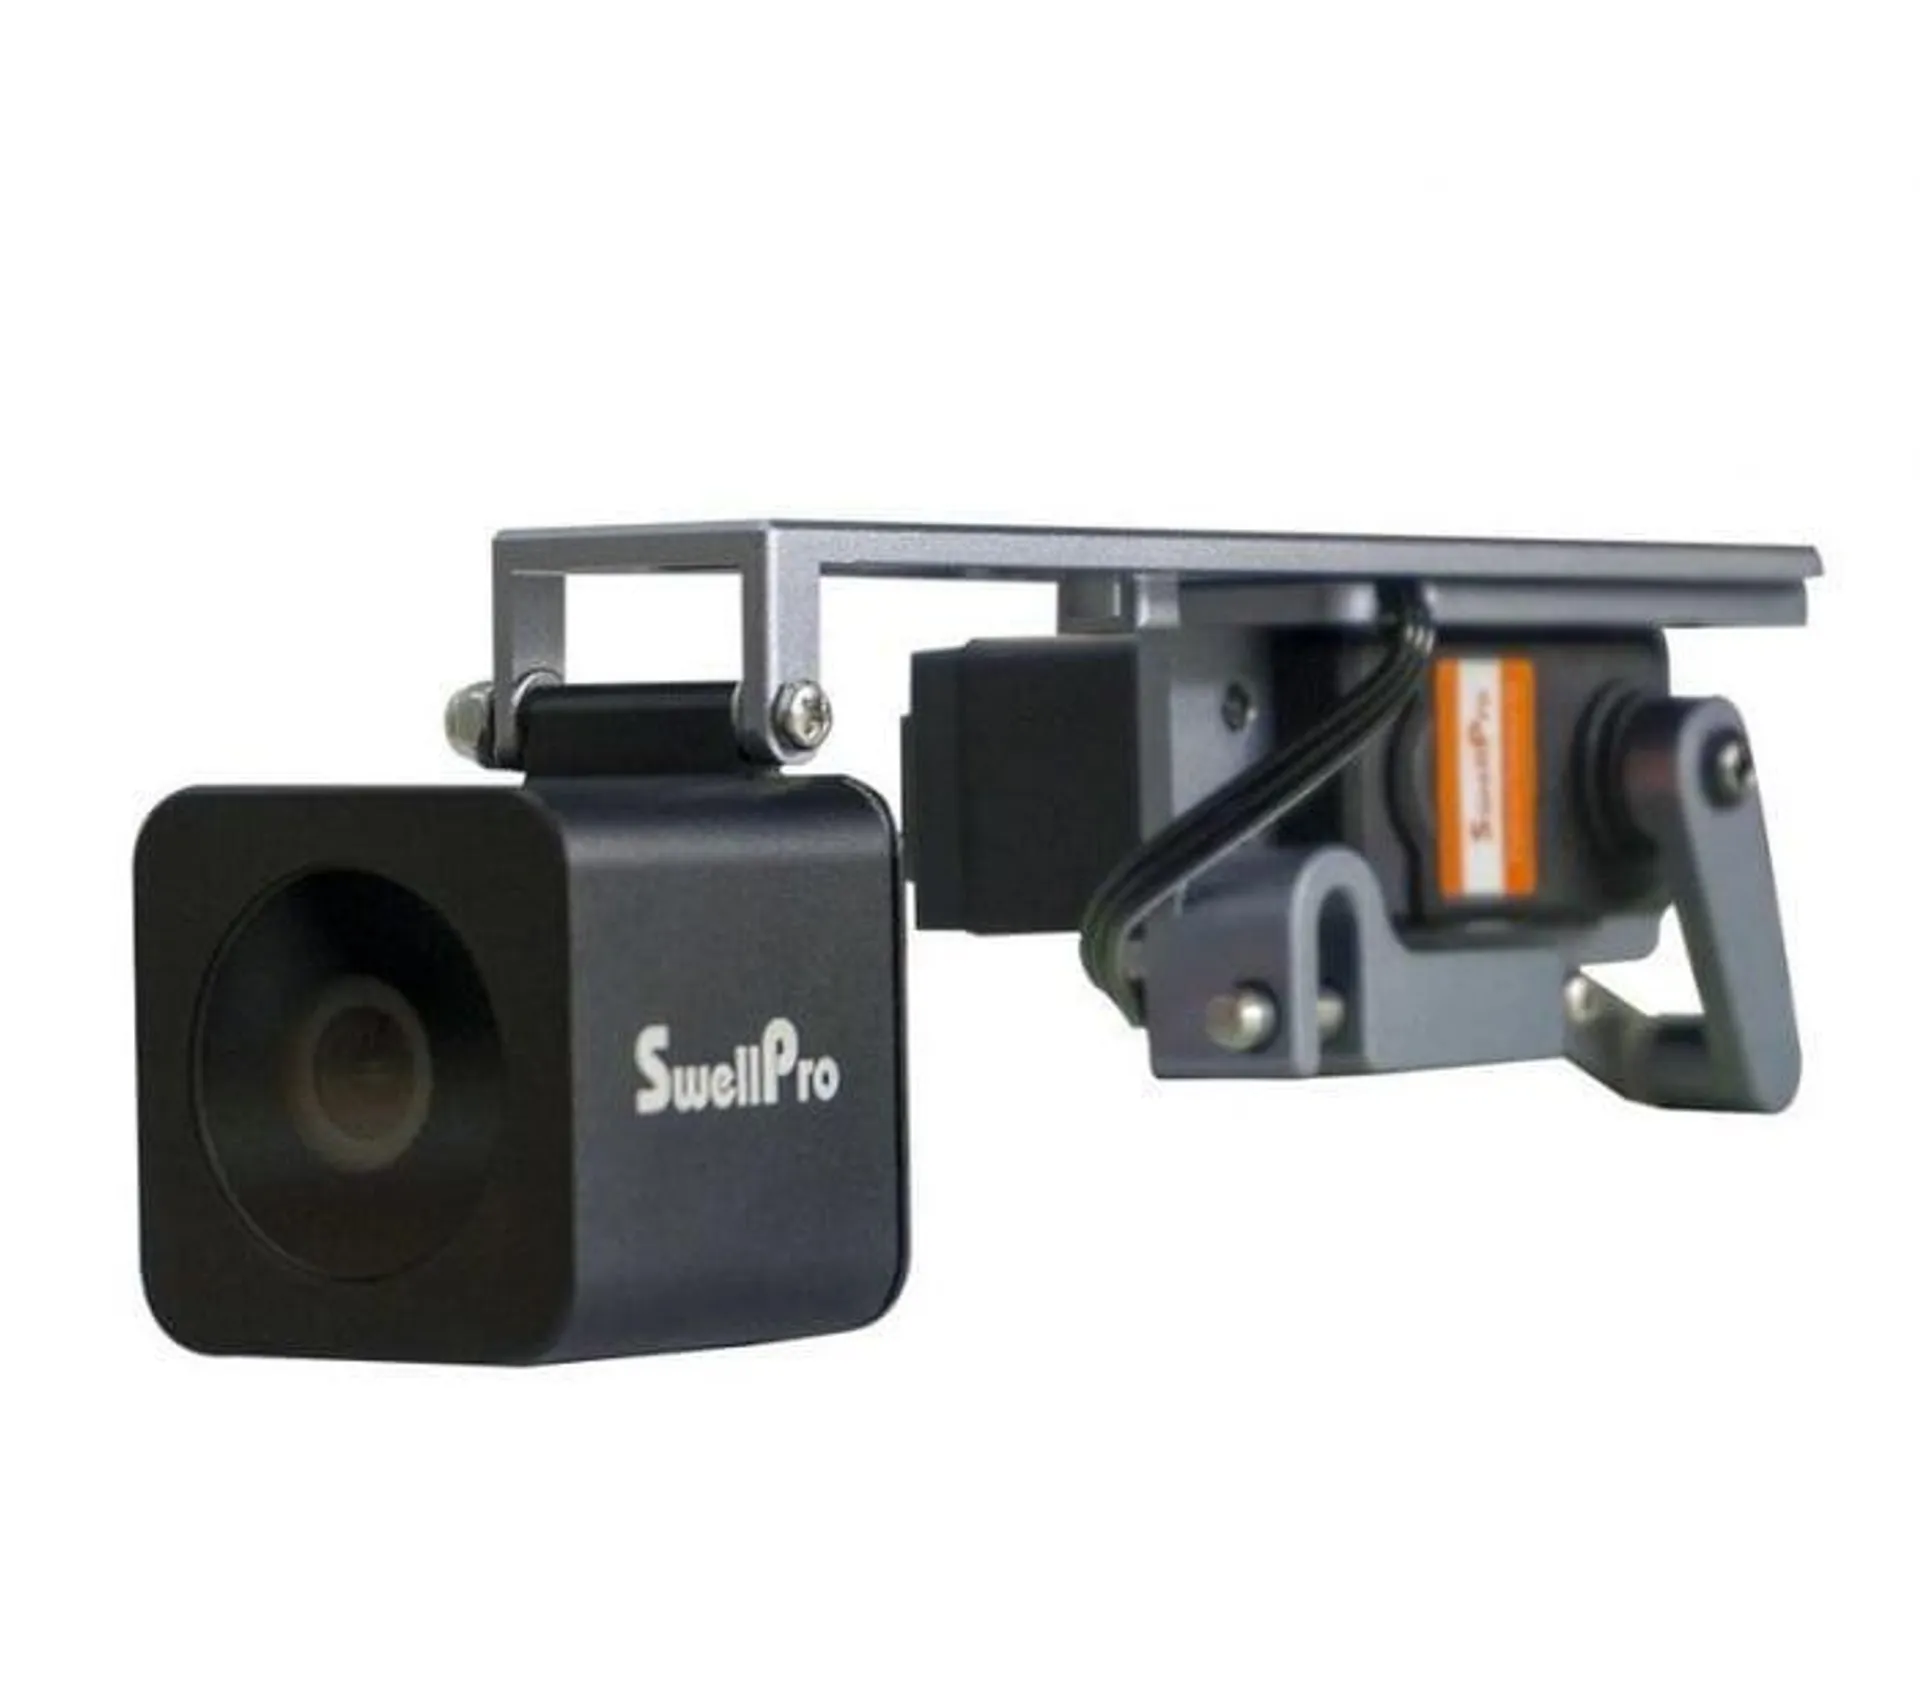 Swellpro Fisherman Drone (FD1) PL2-F Camera and Payload Release